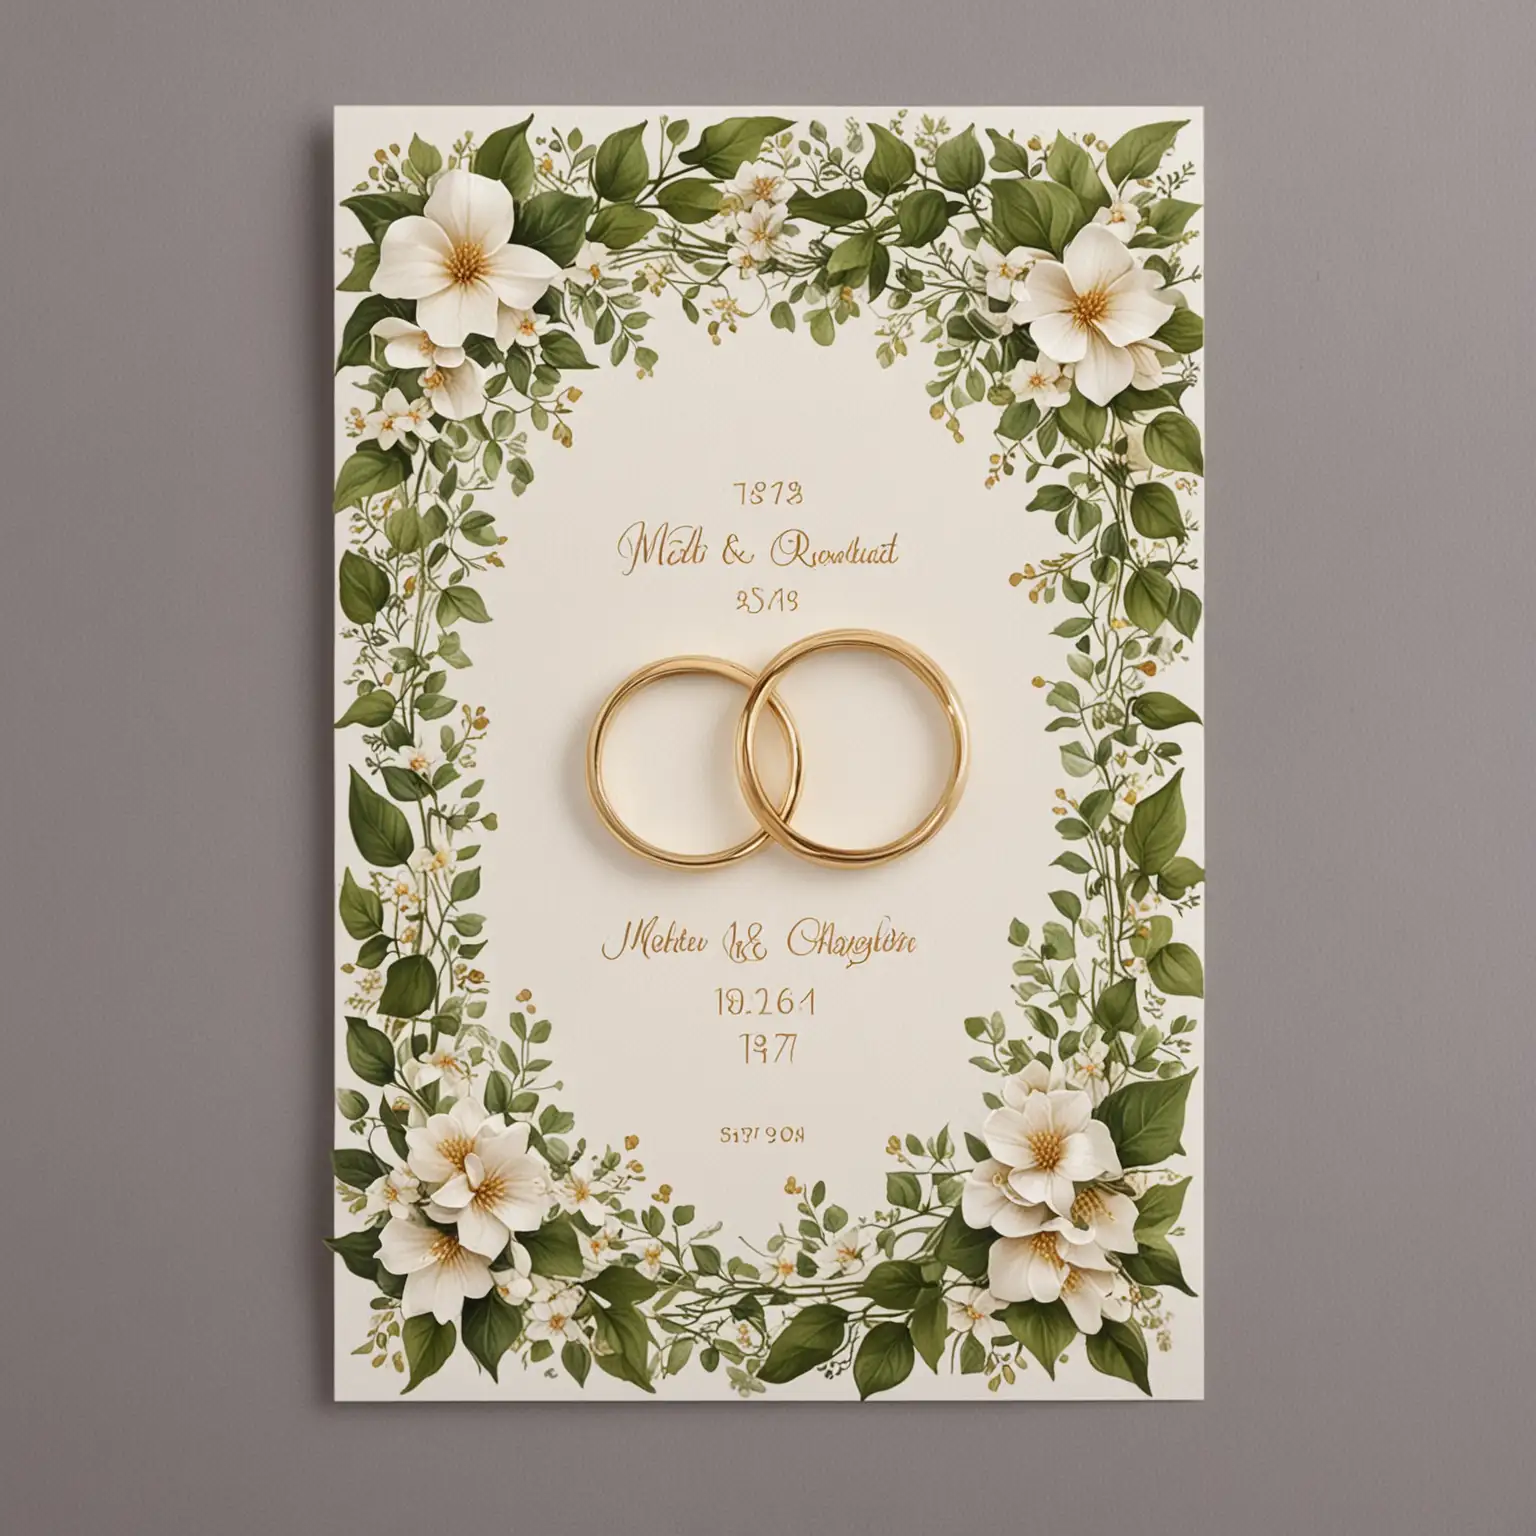 wedding card 11.5 x 17 cm with two gold rings - background with small flowers and ivy